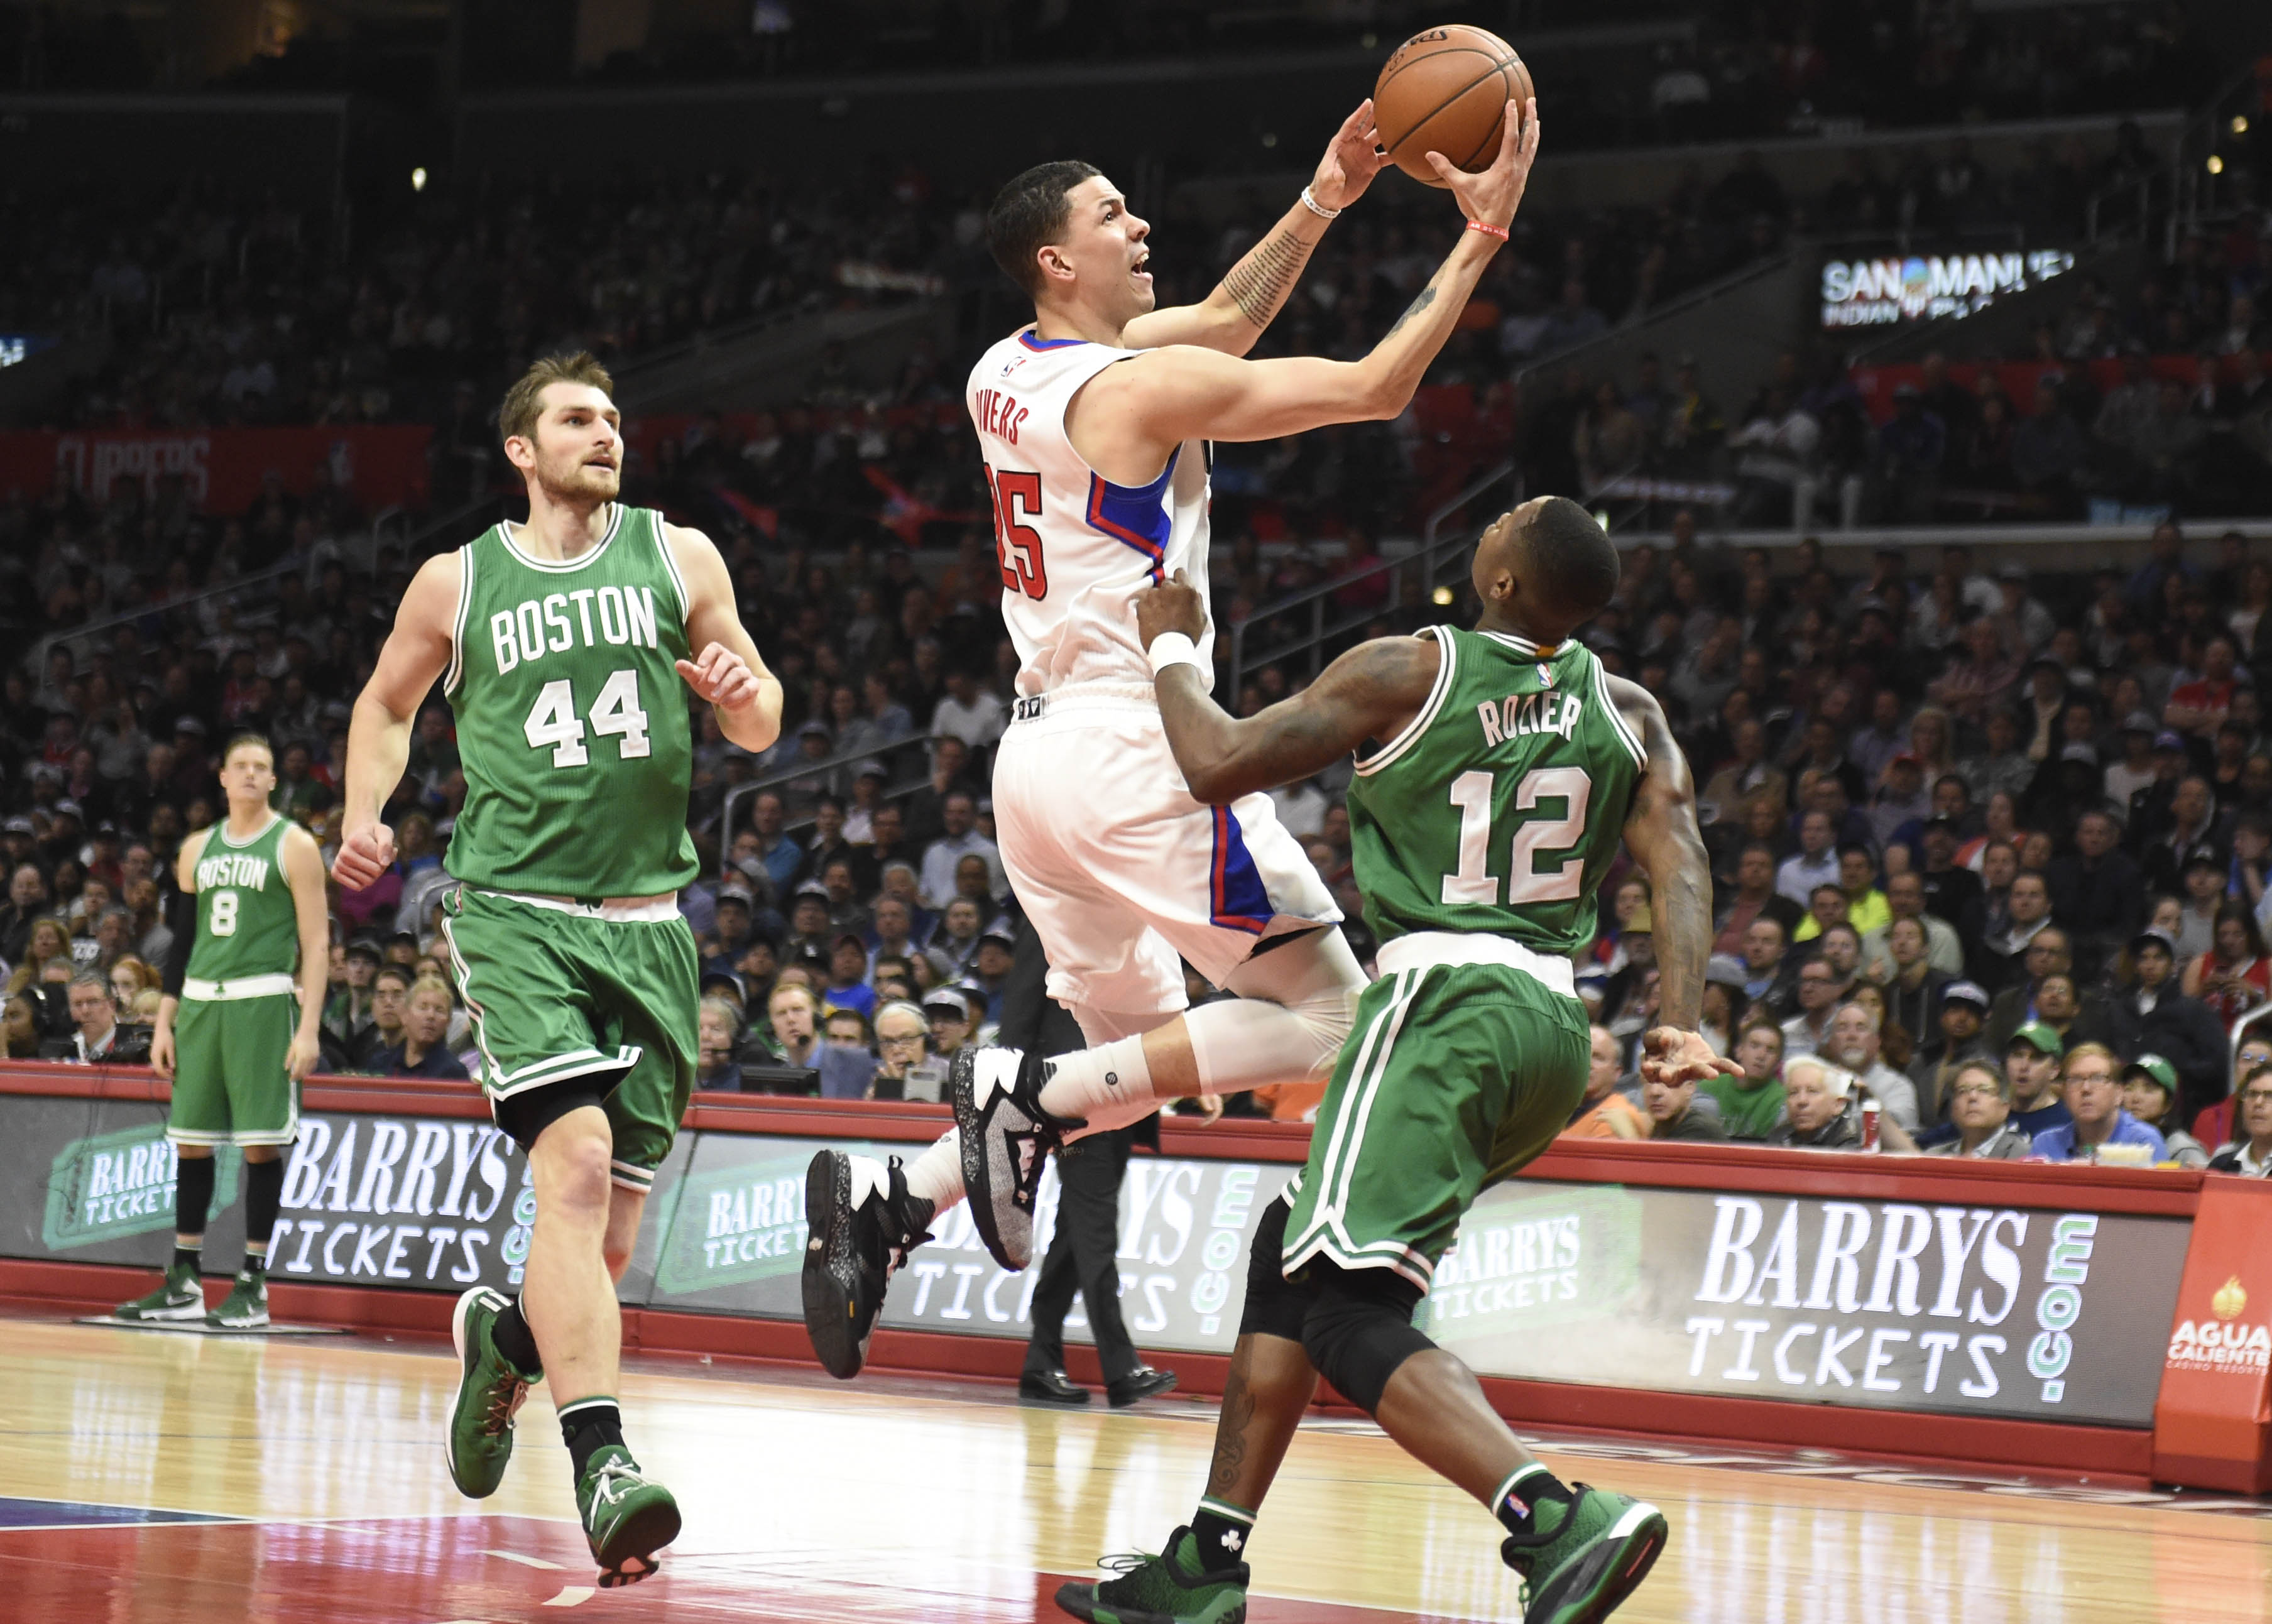 Celtics at Clippers live stream: How to watch online